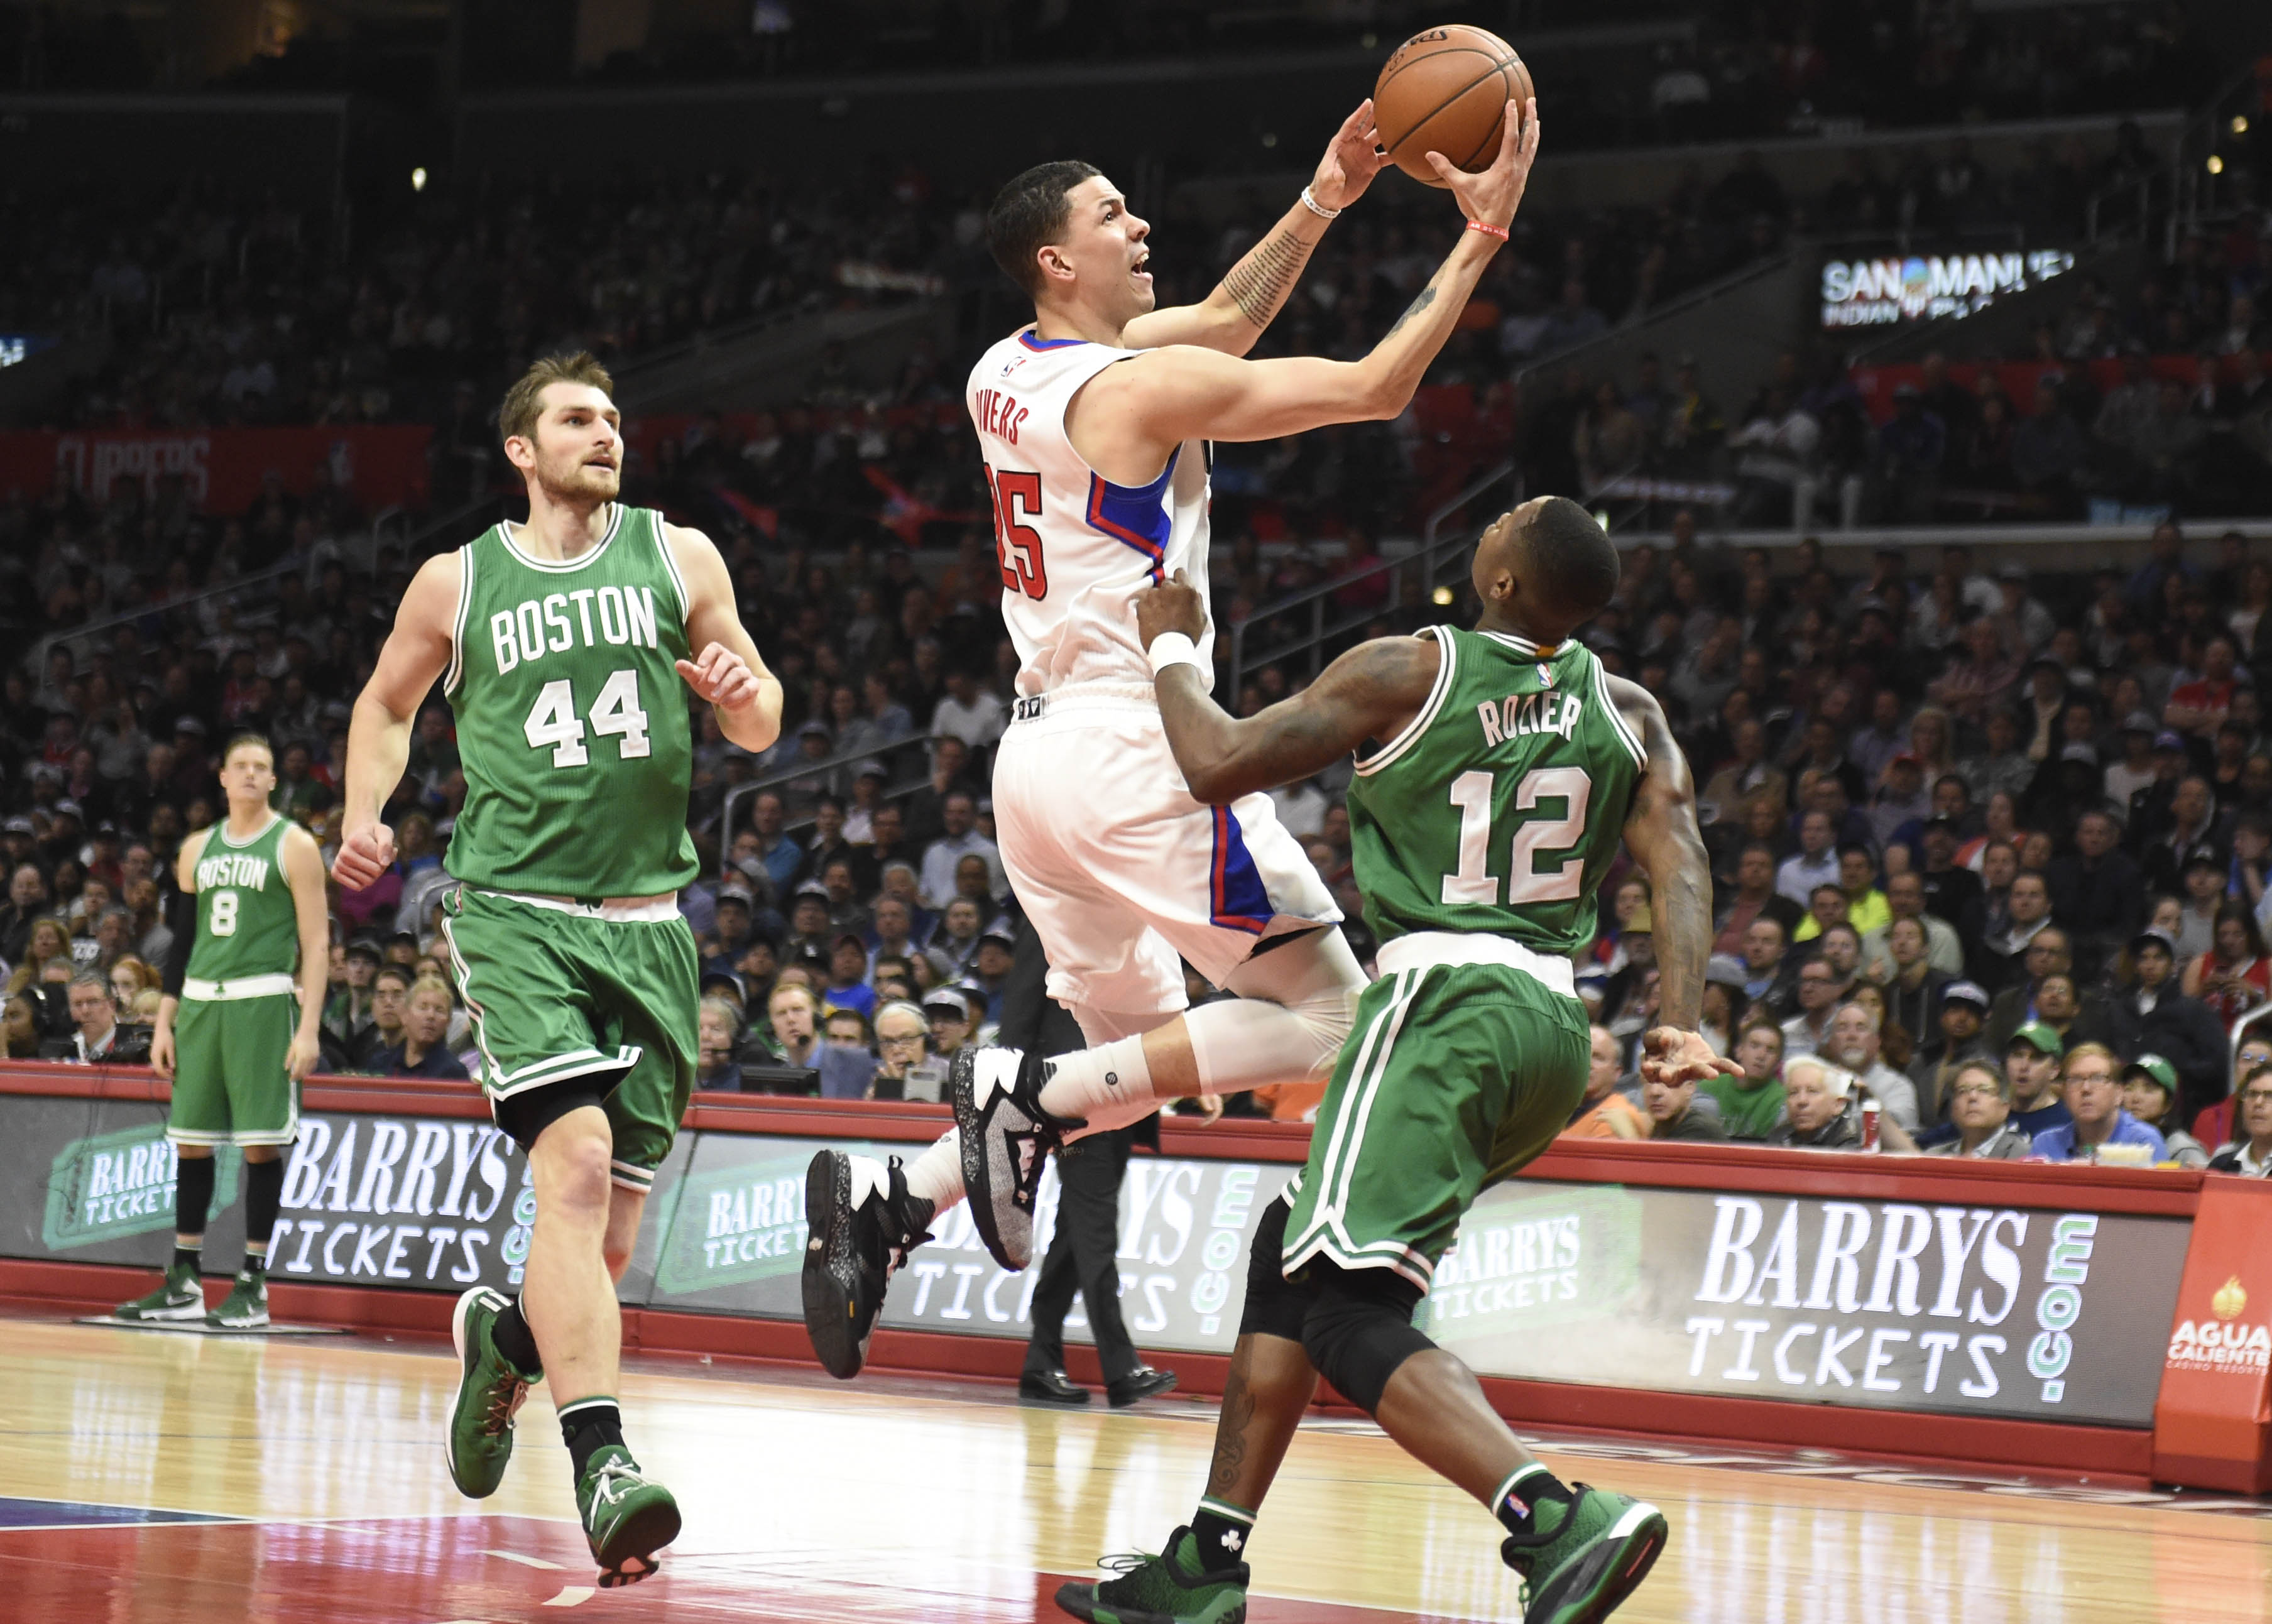 Celtics at Clippers live stream: How to watch online